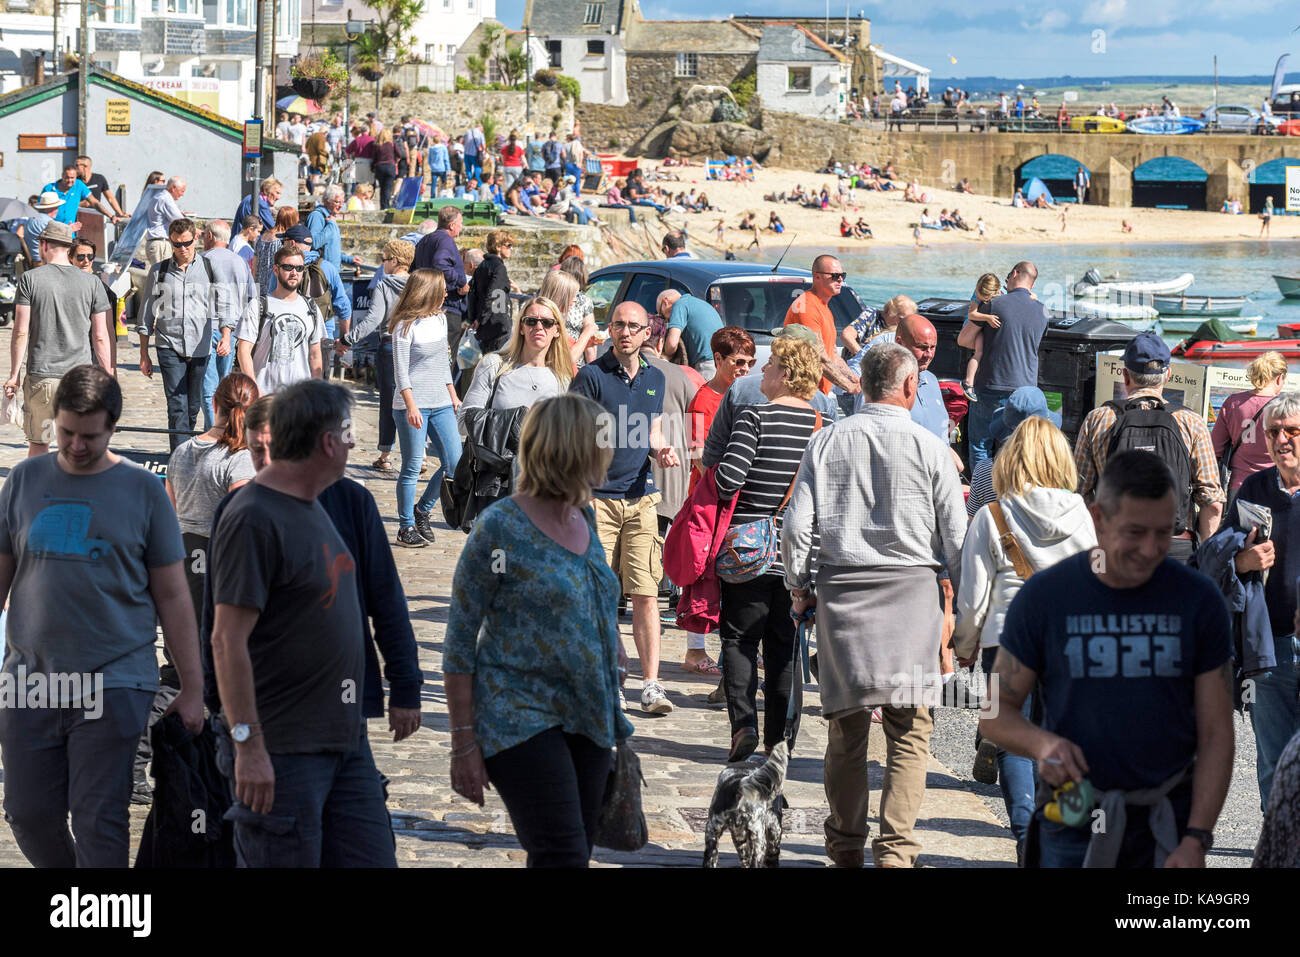 St Ives - holidaymakers relaxing and strolling around St Ives Harbour Beach in Cornwall. Stock Photo